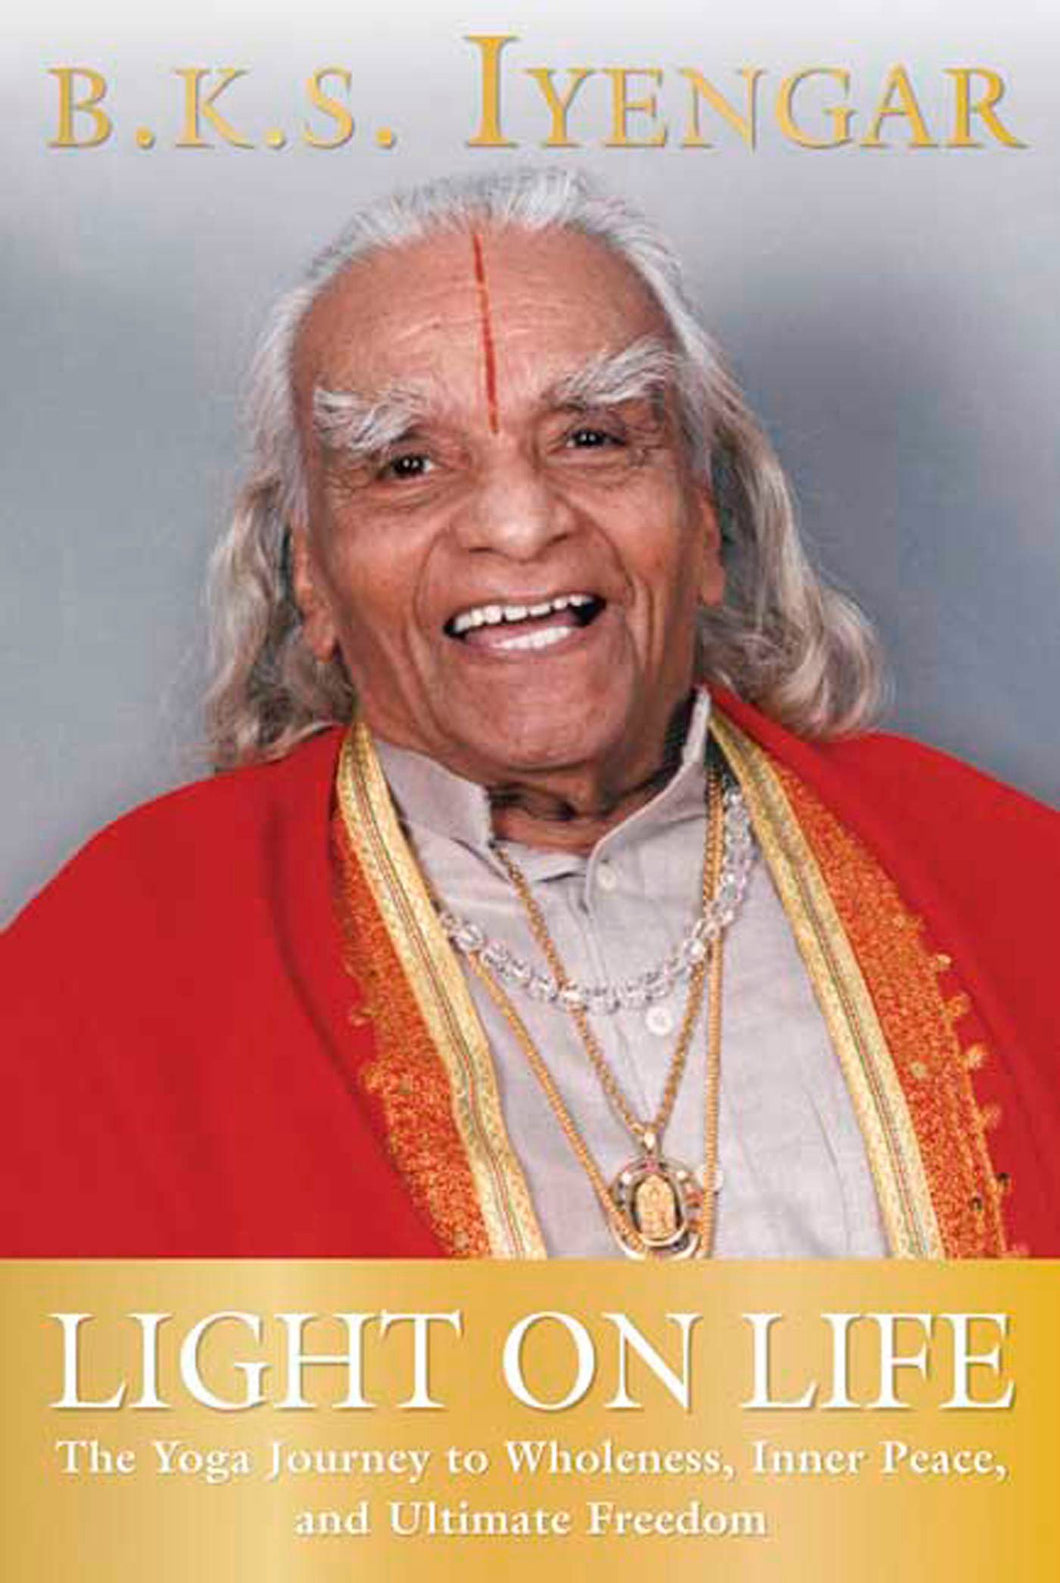 Light on Life: The Yoga Journey to Wholeness, Inner Peace, and Ultimate Freedom [B.K.S. Iyengar]